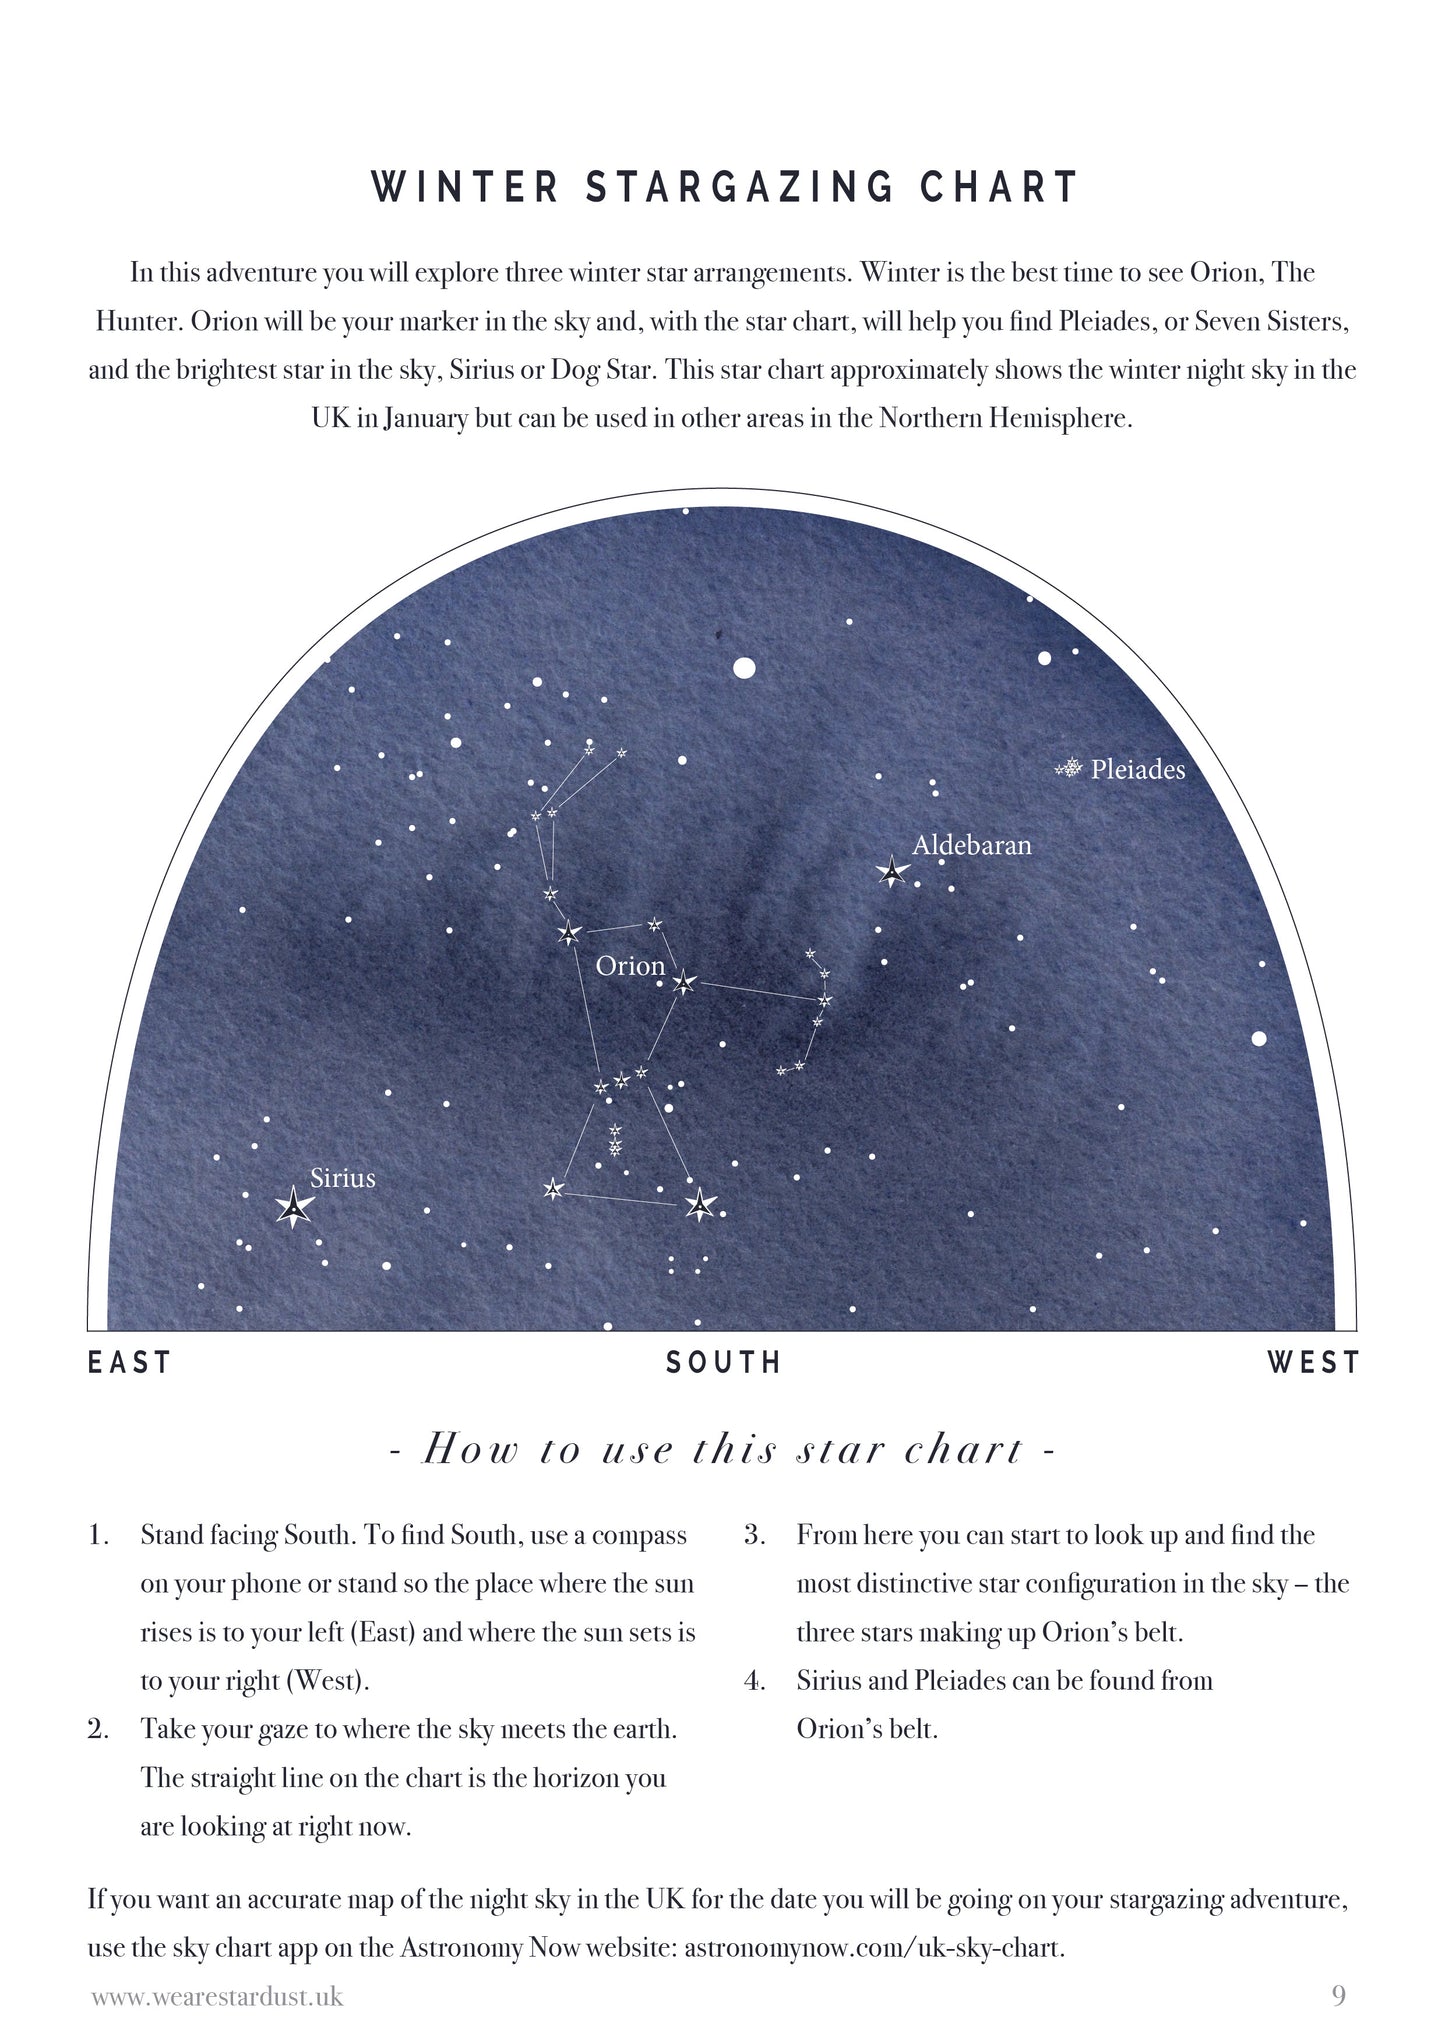 Stars and Stories: A Digital Winter Stargazing Pack